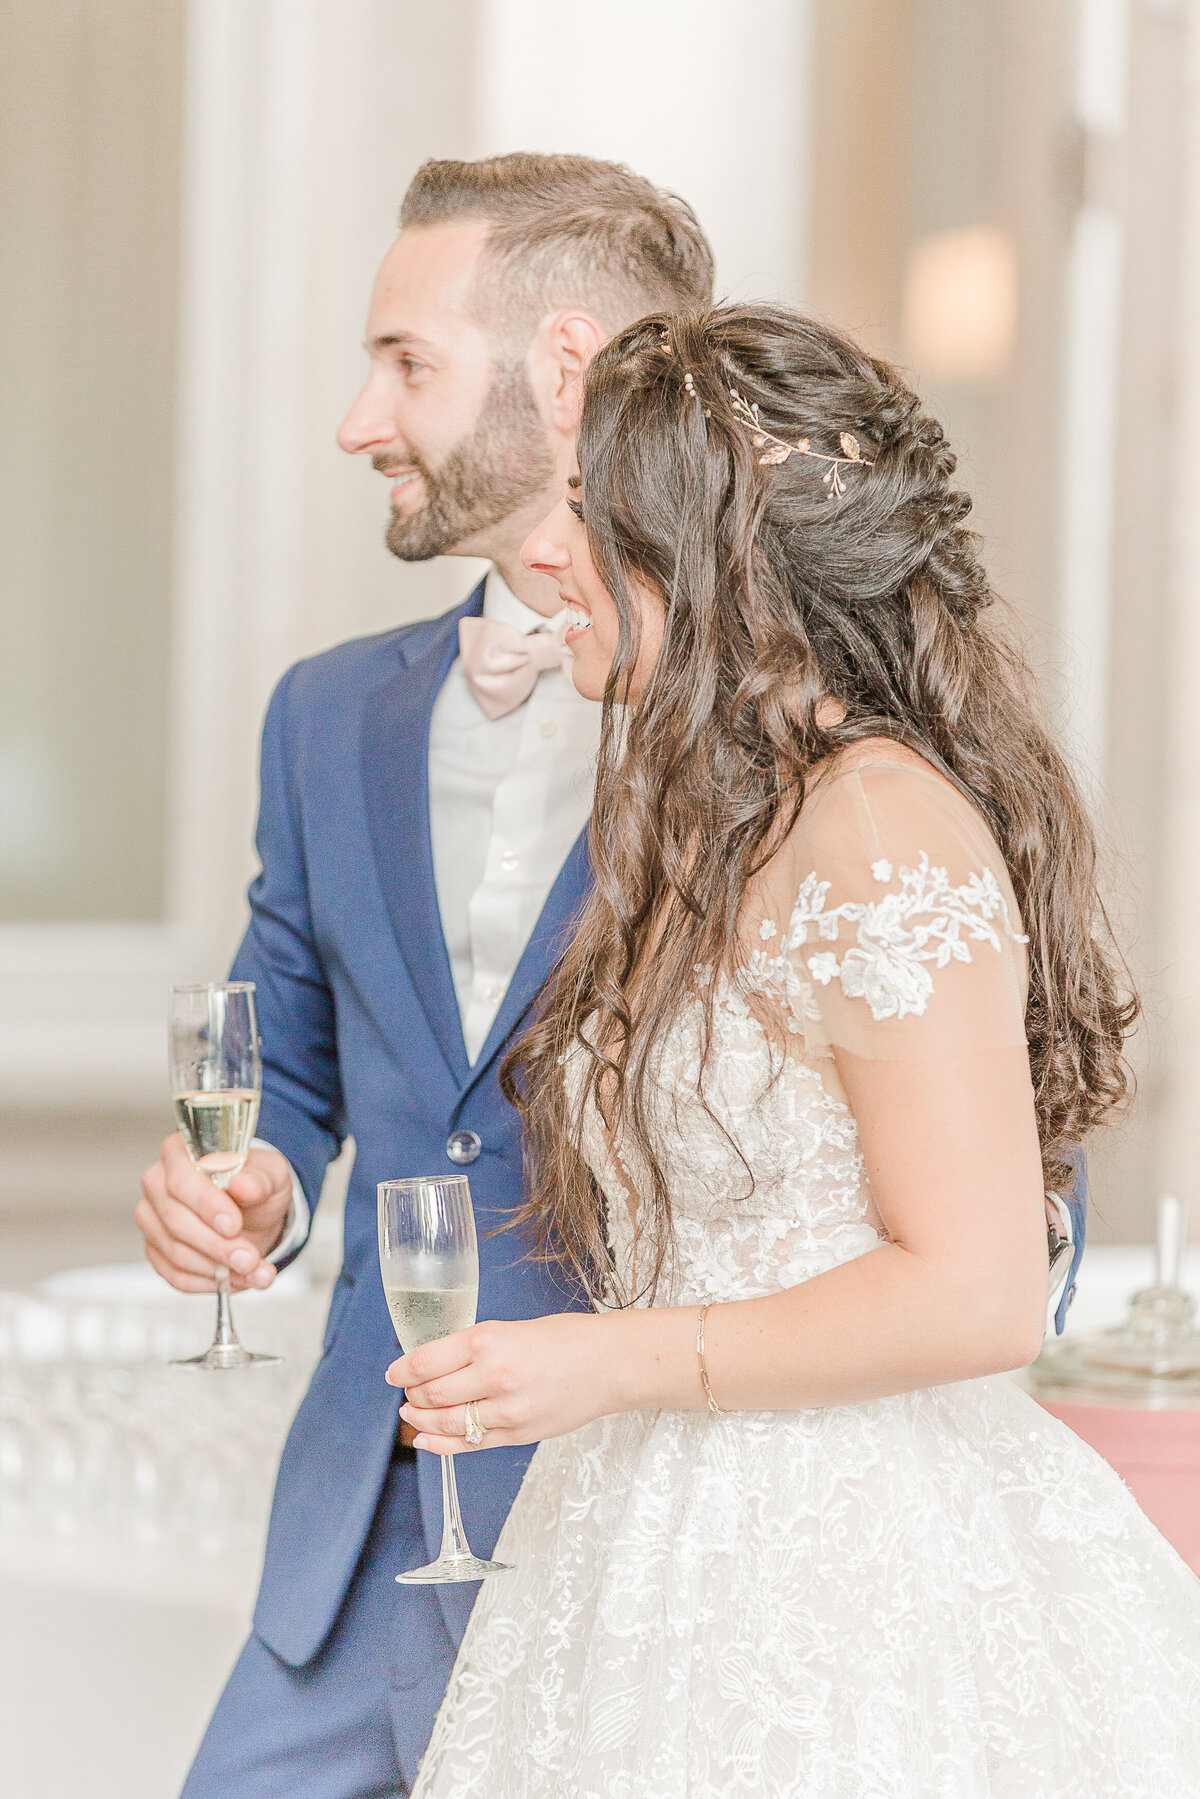 Bride and groom stand holding glasses of champagne at their Eolia Mansion wedding reception in Waterford, CT. Side profile close-up image. Bride and groom smiling as they are hearing speeches. Captured by best CT wedding photographer Lia Rose Weddings